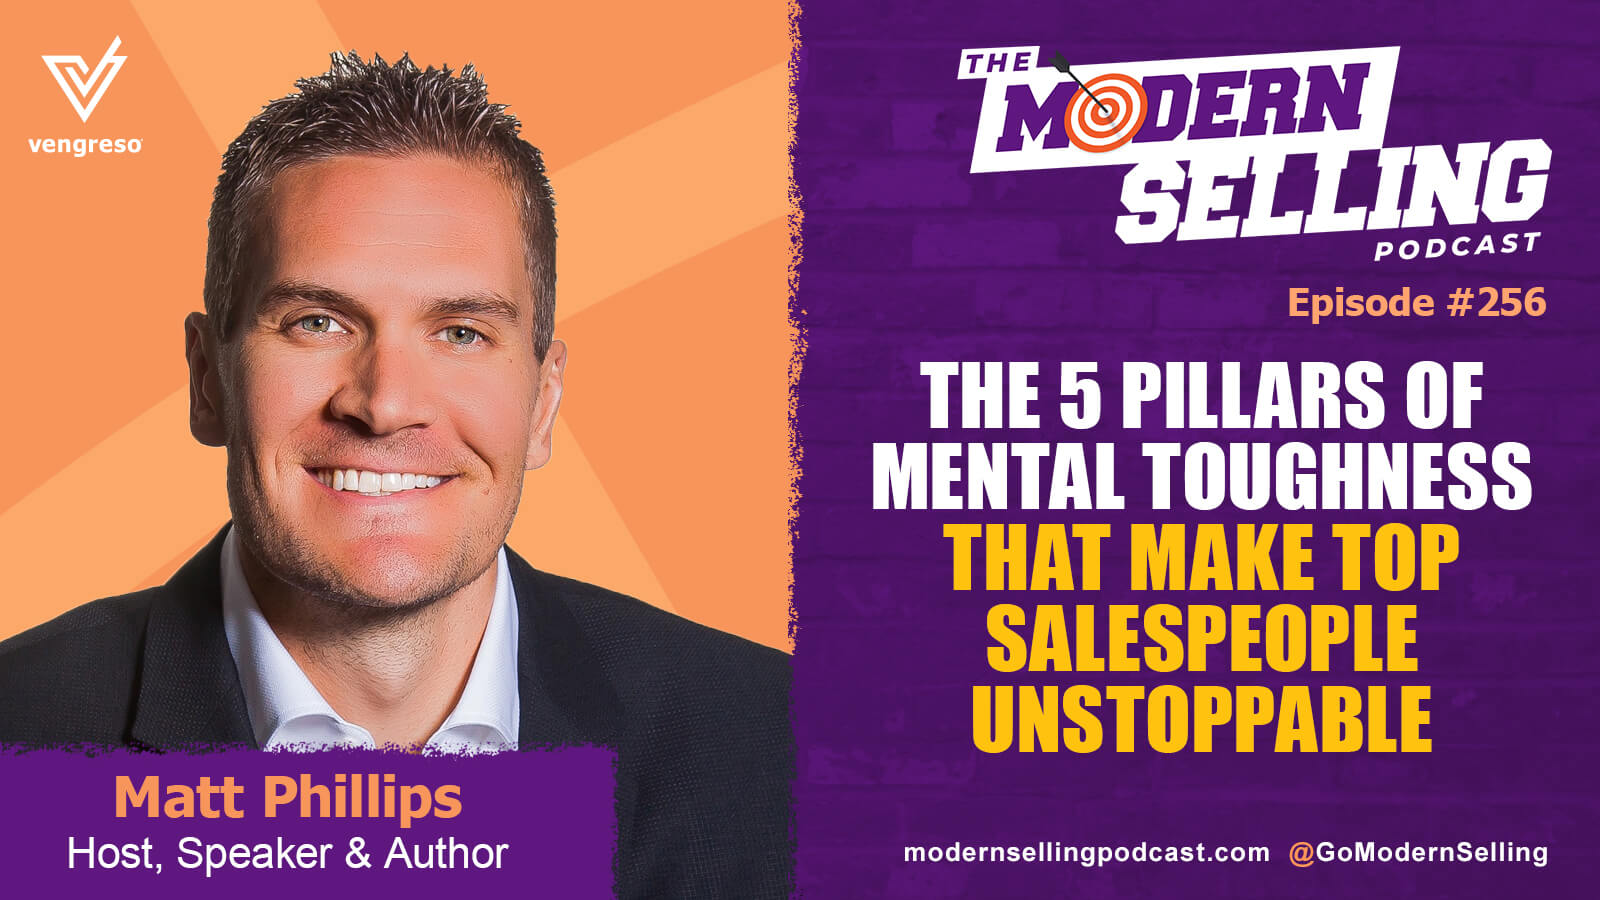 Discover the secrets of mental toughness that transform salespeople into unstoppable top performers.